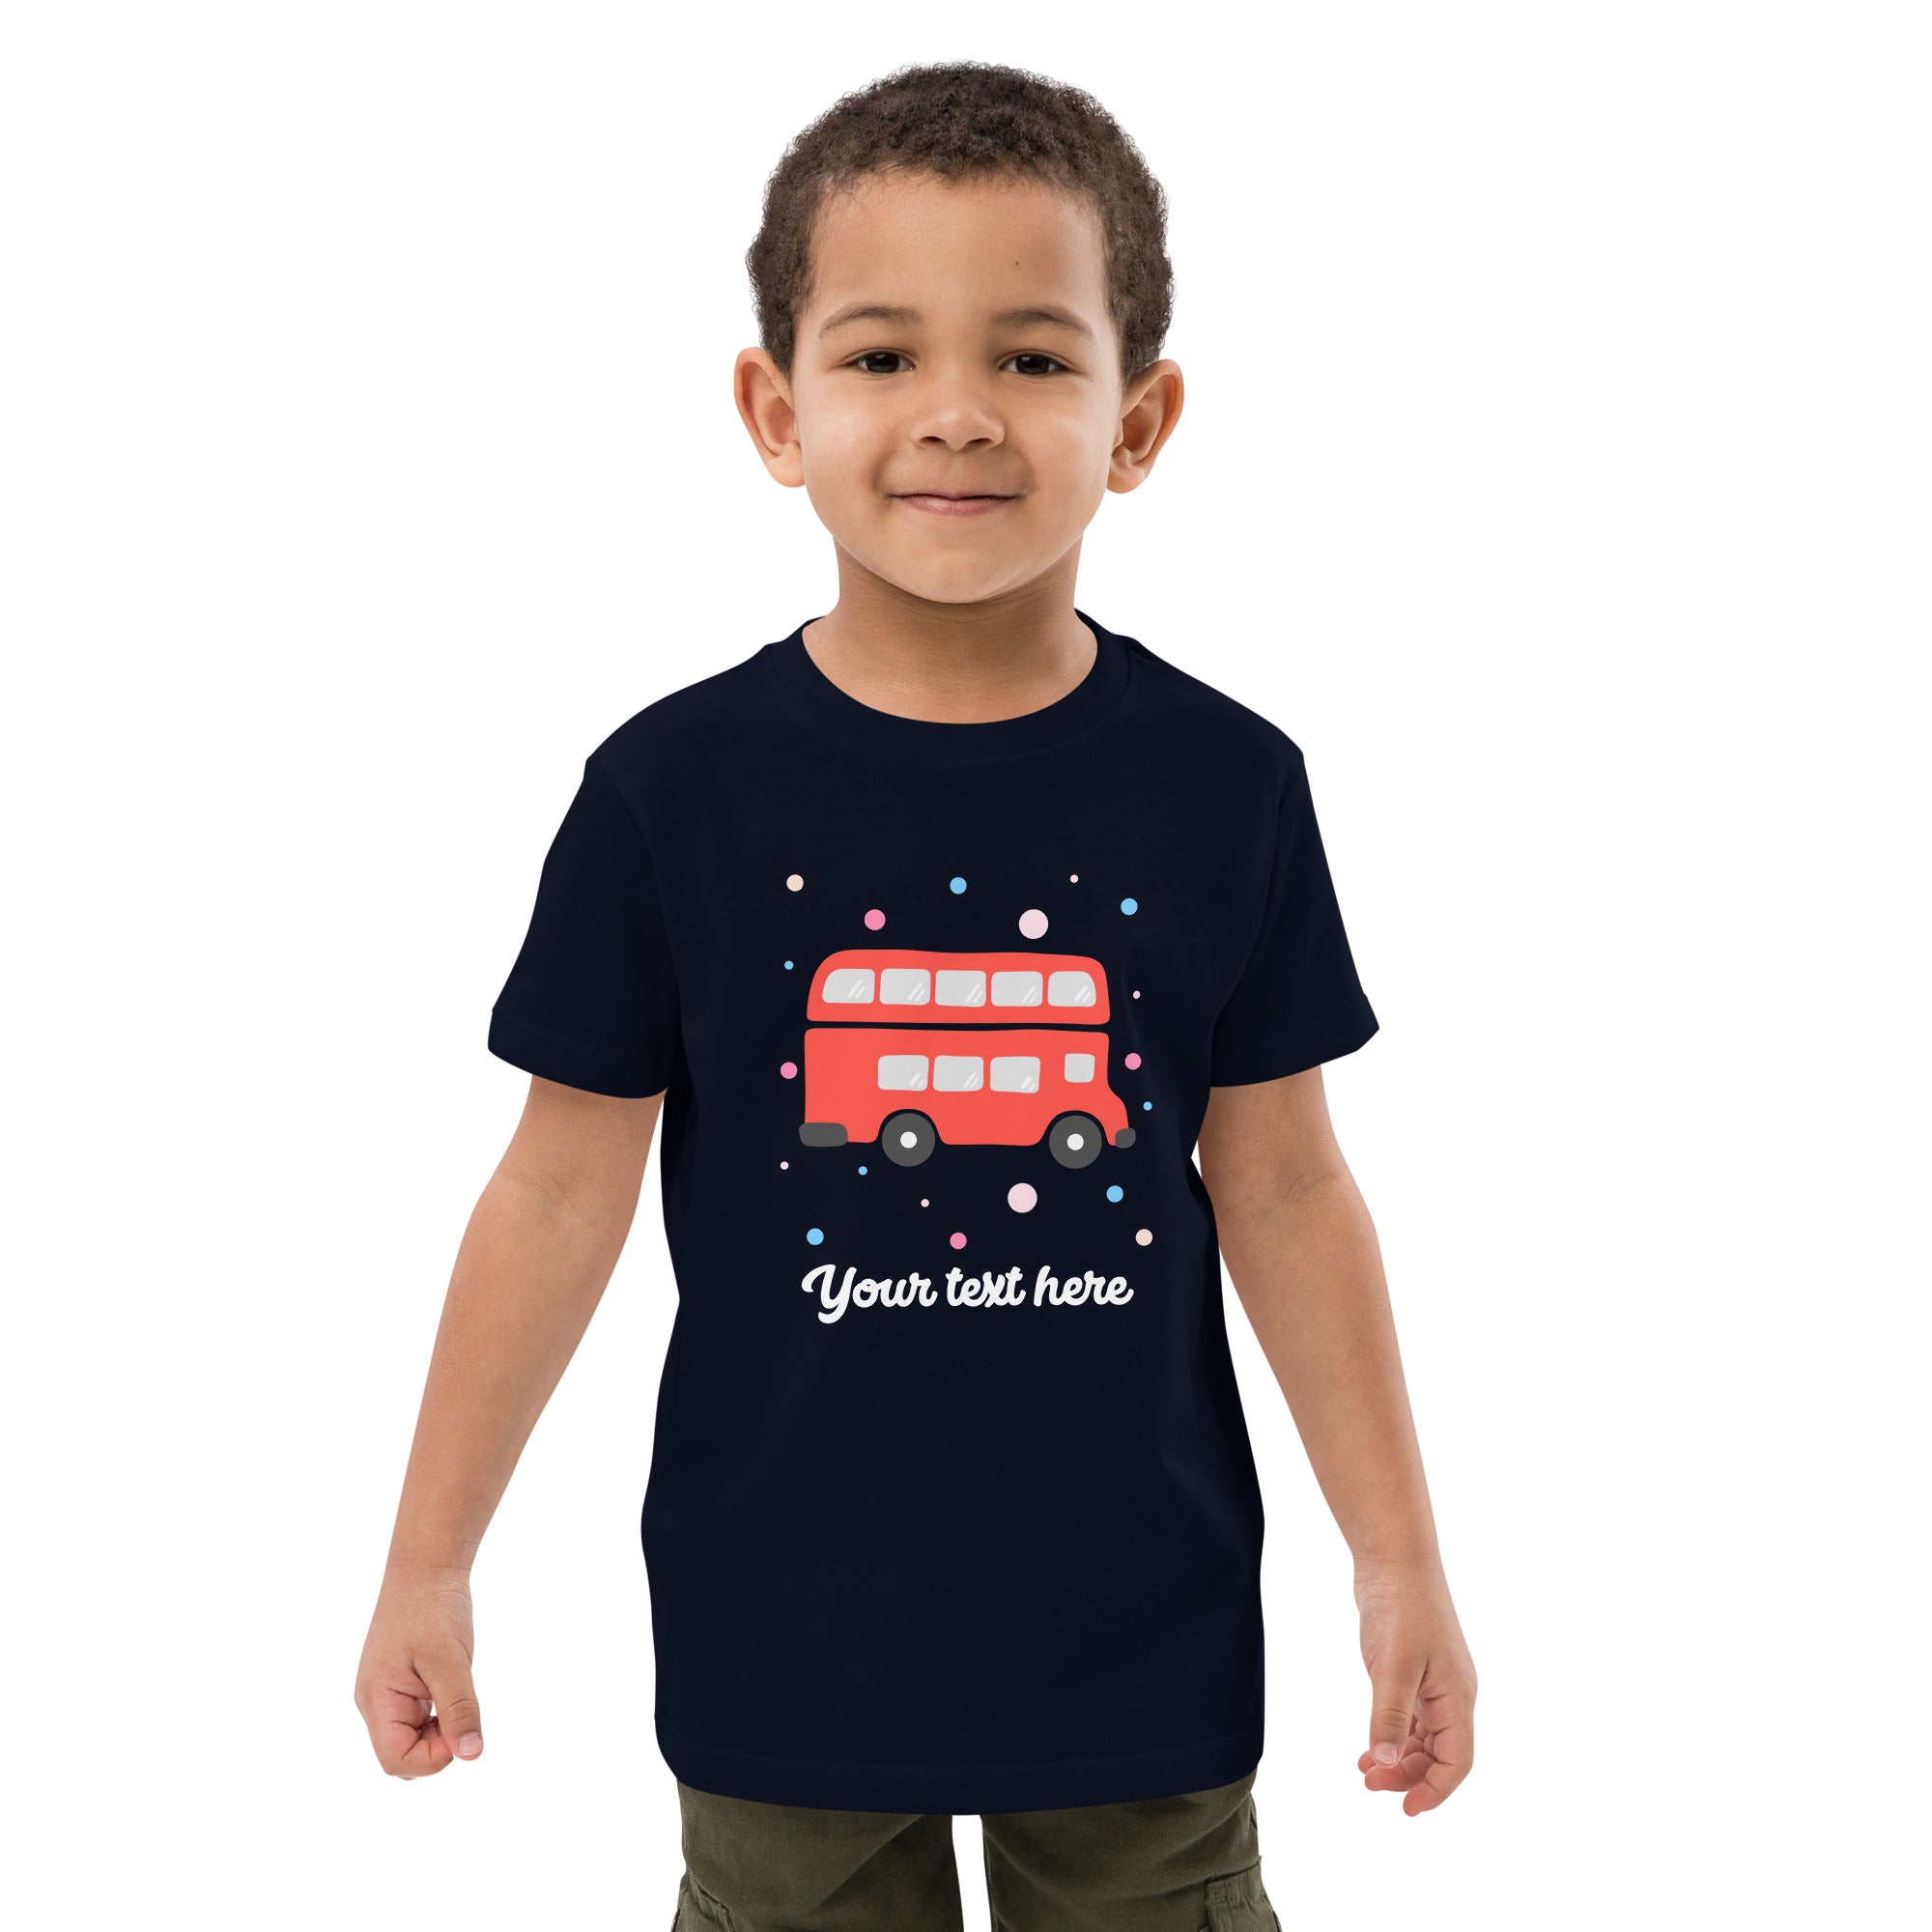 Personalised Custom Text - Organic Cotton Kids T-Shirt - London Doodles - Red Bus - Navy 2